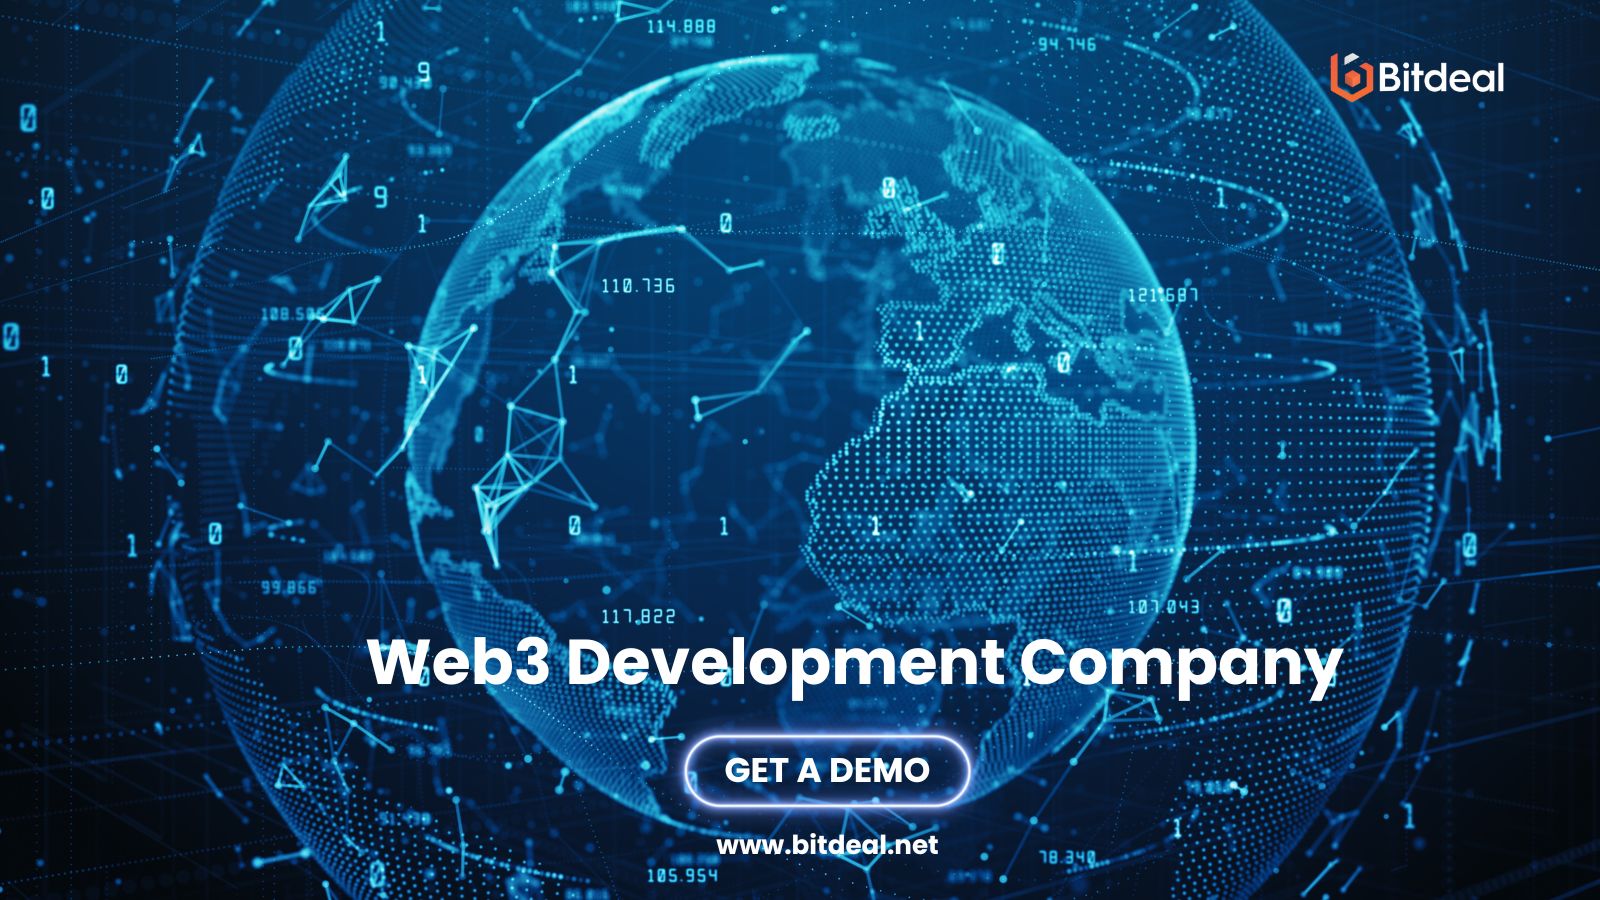  Grab Your Web3 Development Benefits With Bitdeal